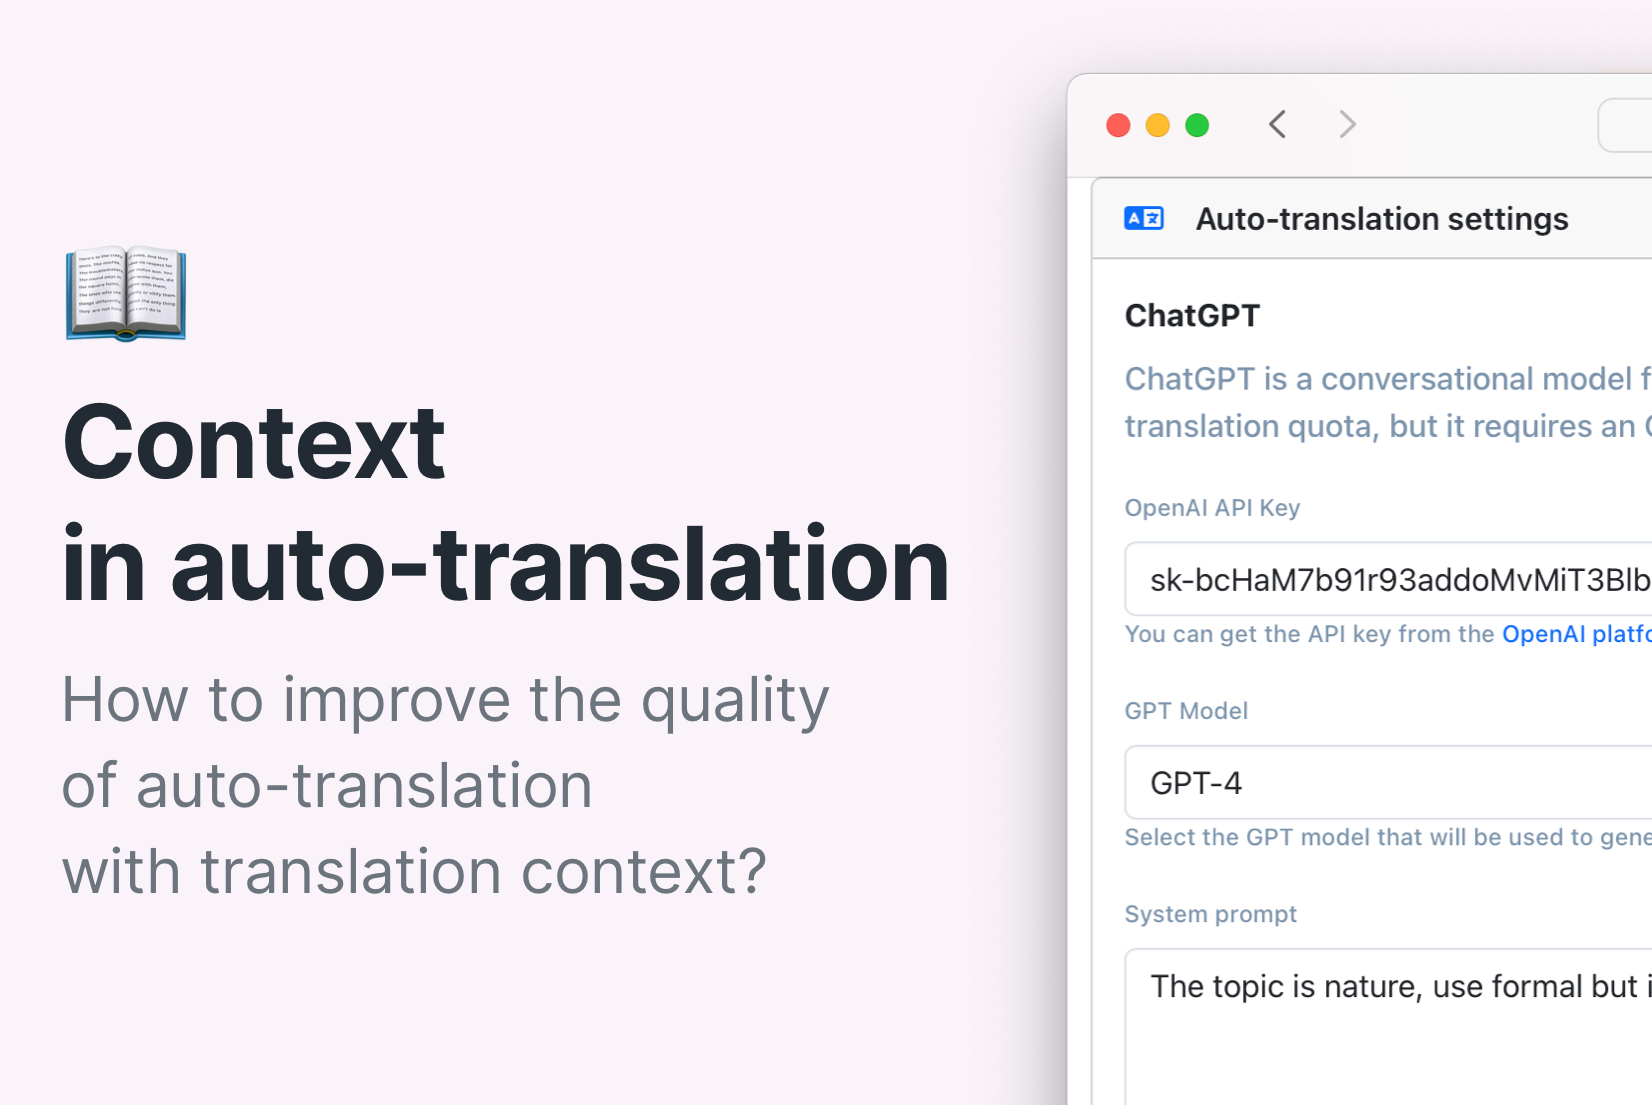 ChatGPT and DeepL translation context in auto-translation